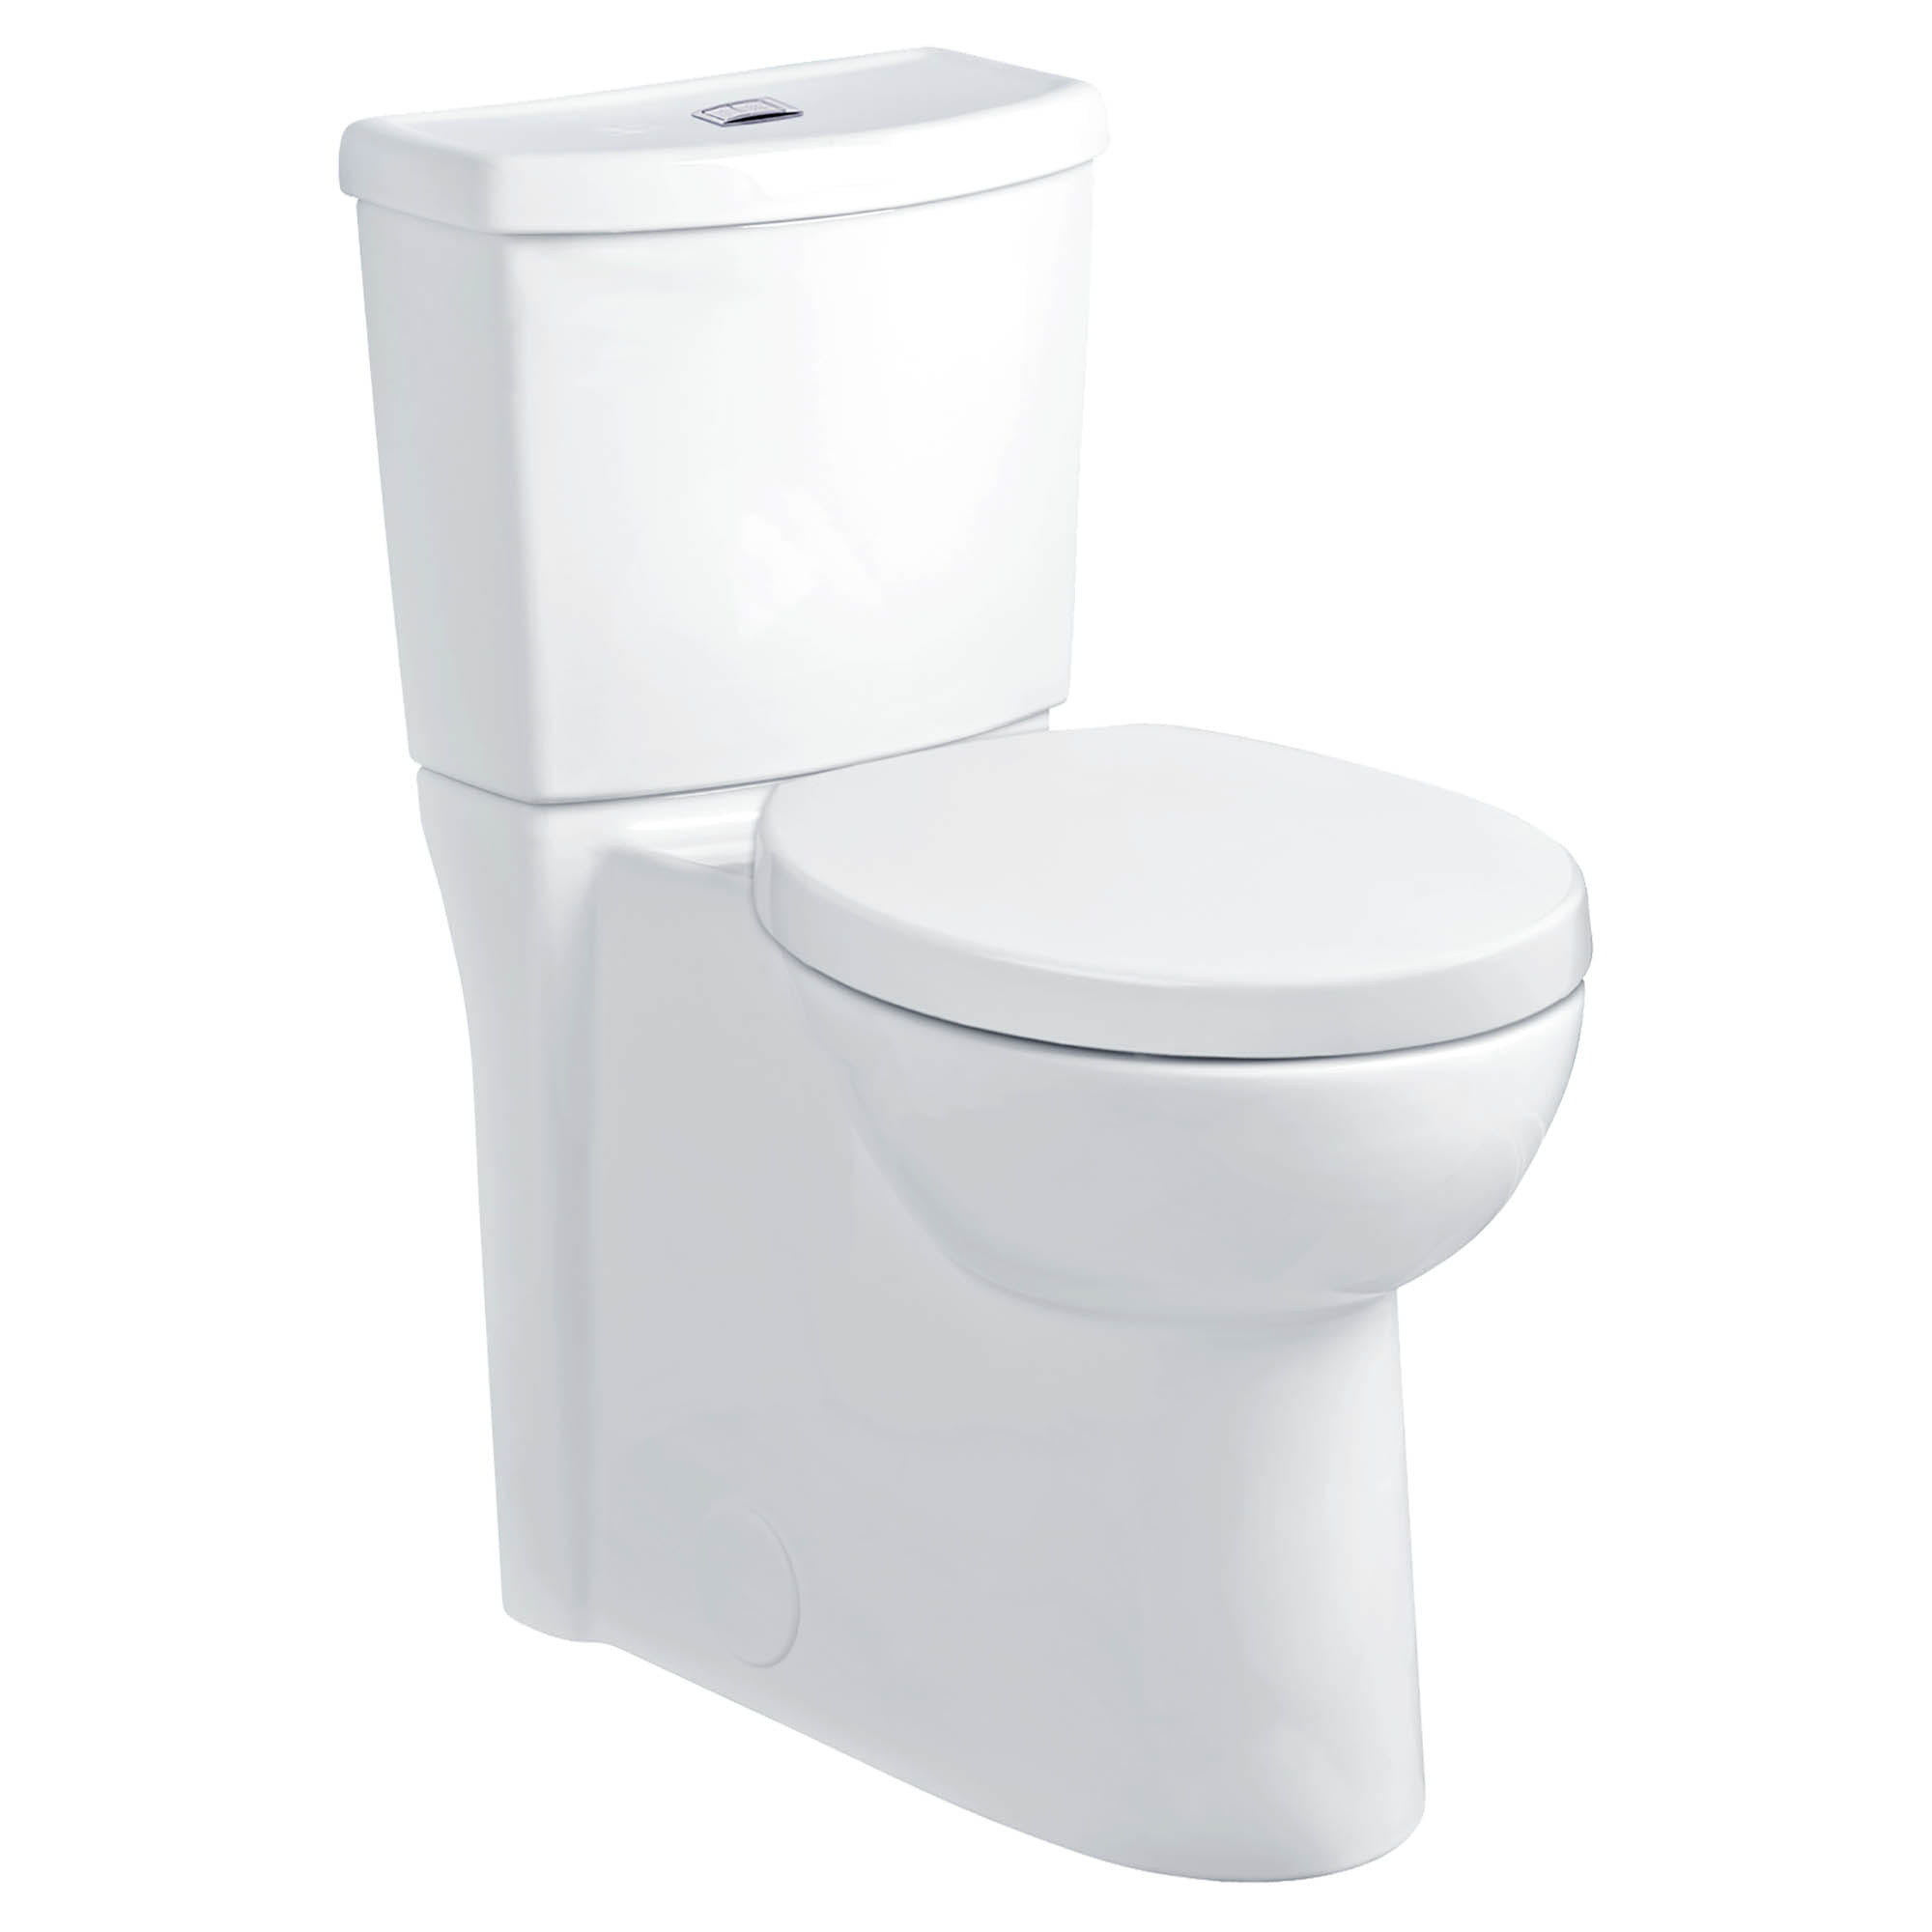 Studio Skirted Two-Piece Dual Flush 1.6 gpf/6.0 Lpf and 1.1 gpf/4.2 Lpf Chair Height Round Front Toilet With Seat